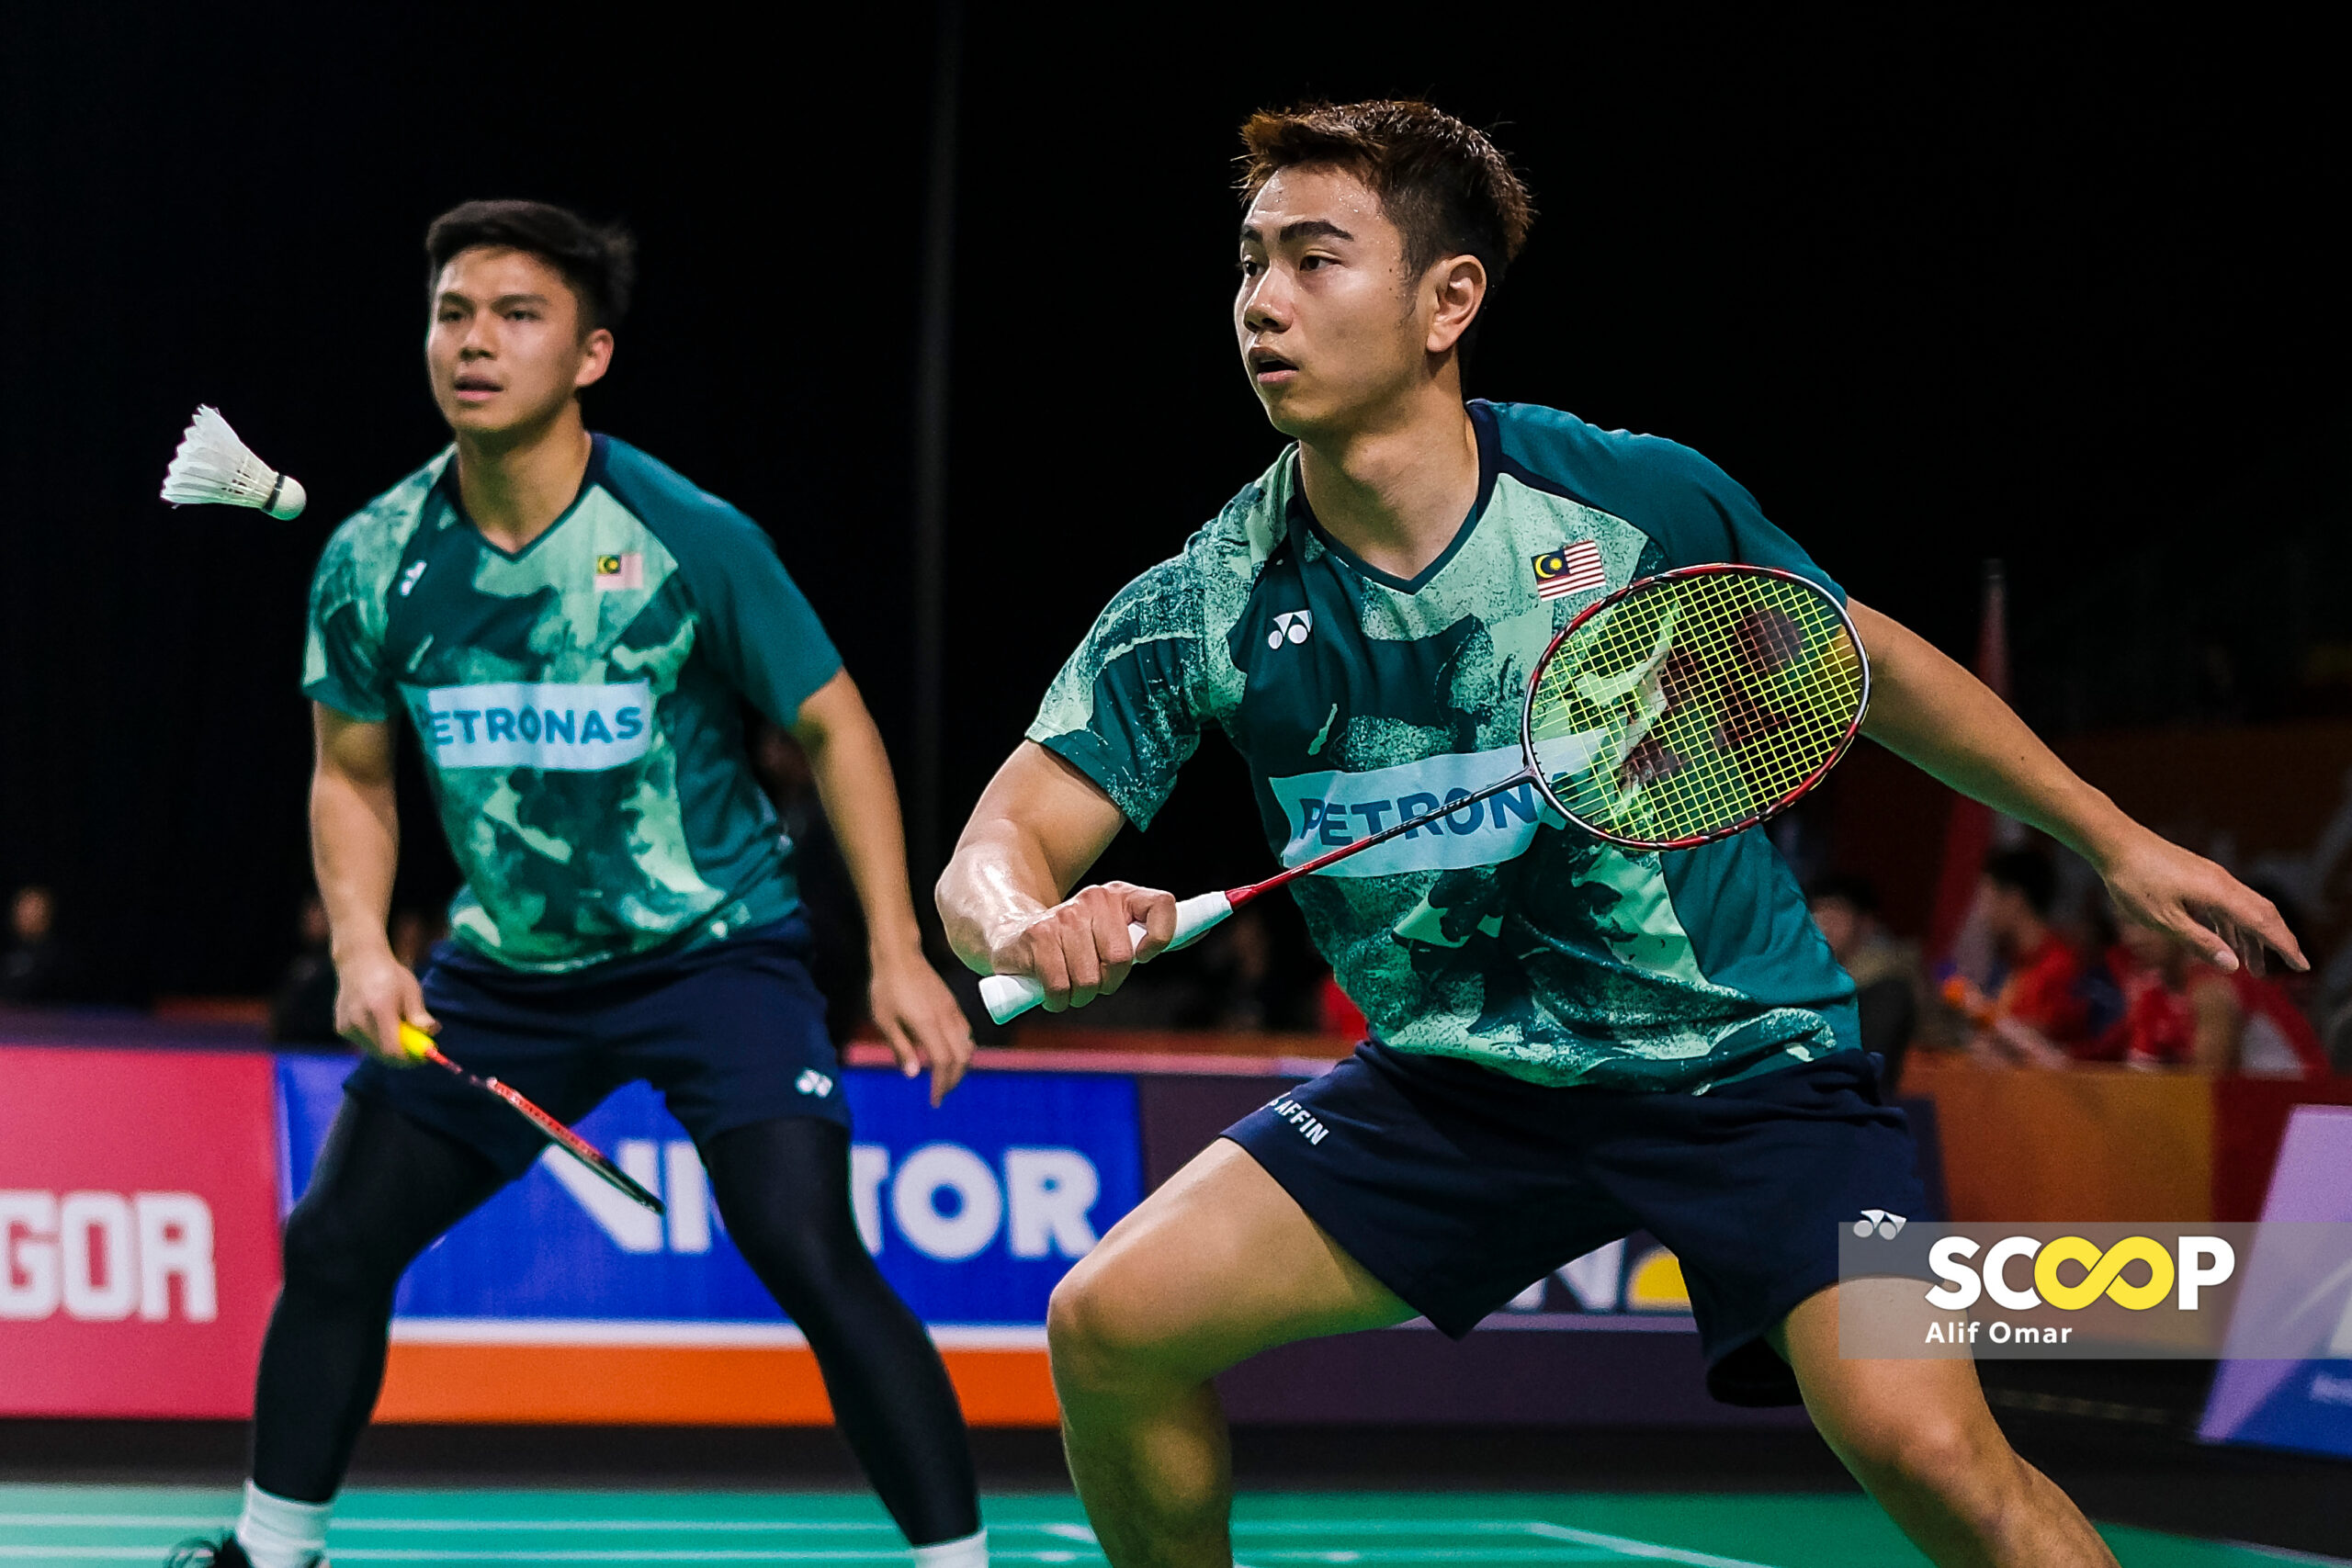 Stroke of luck: Sze Fei-Izzuddin make quarters after Chinese opponents withdraw